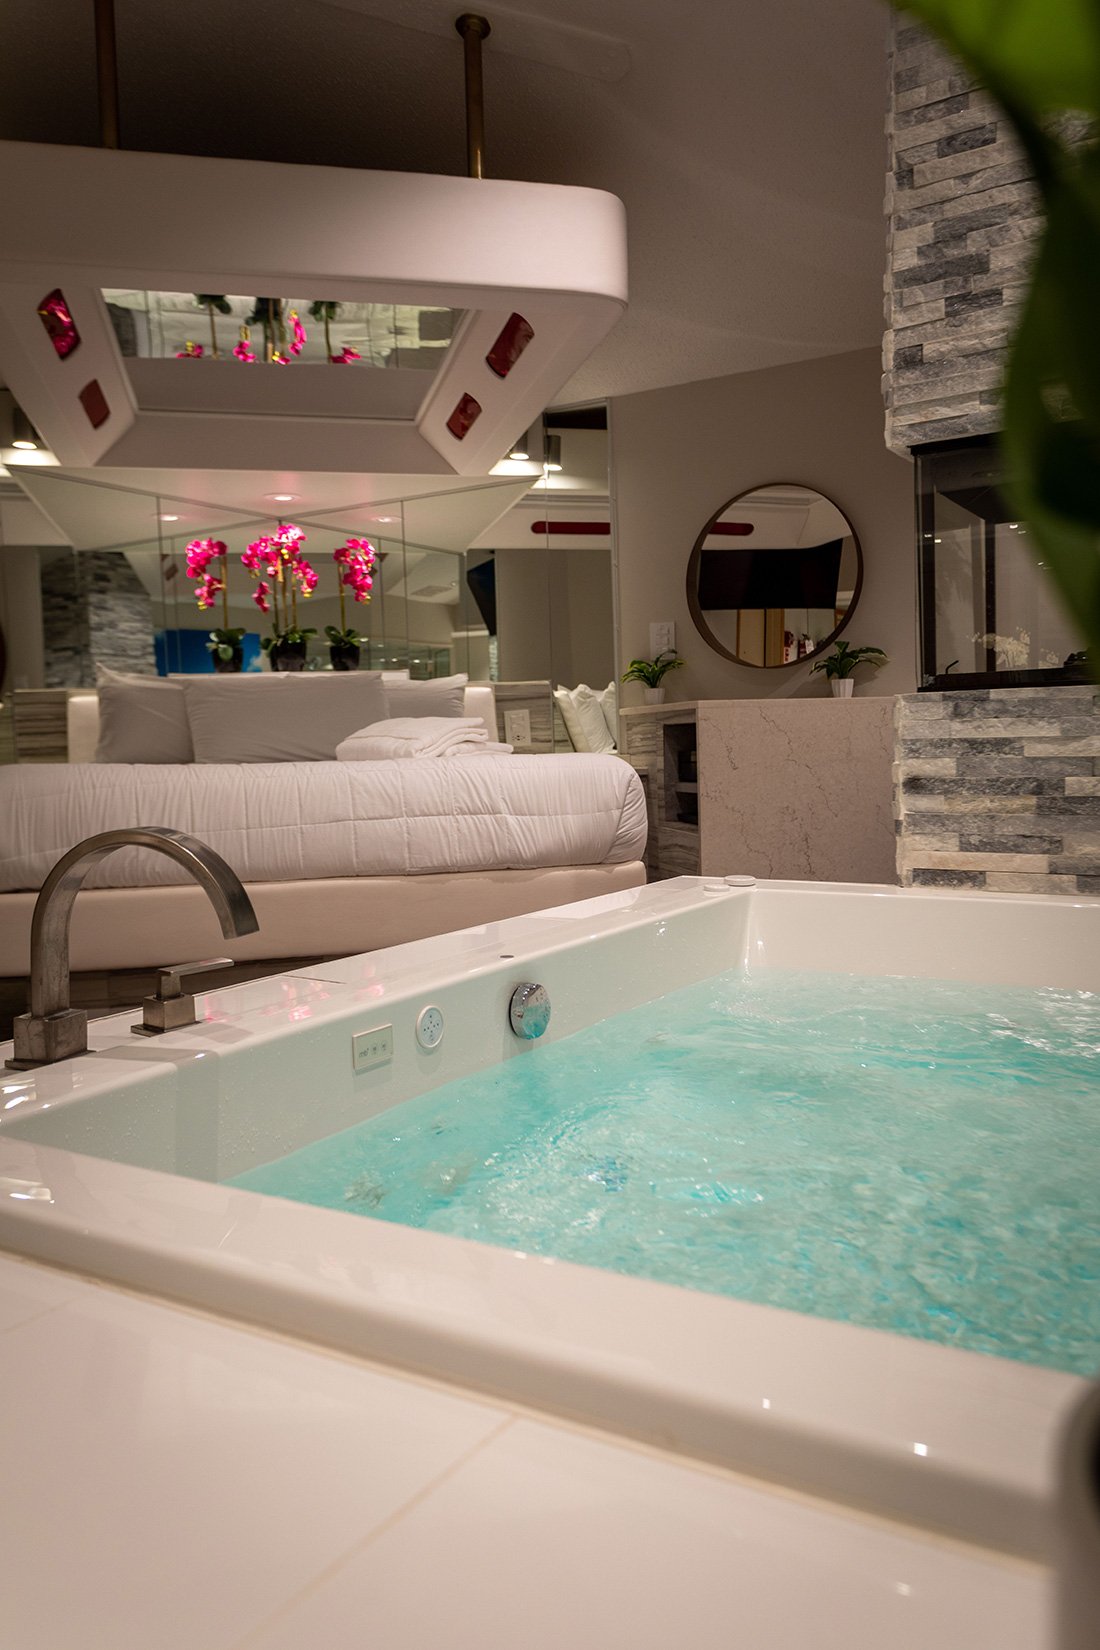 Sybaris, Chicago's romantic getaway spot, gets boost from COVID-19 cabin  fever